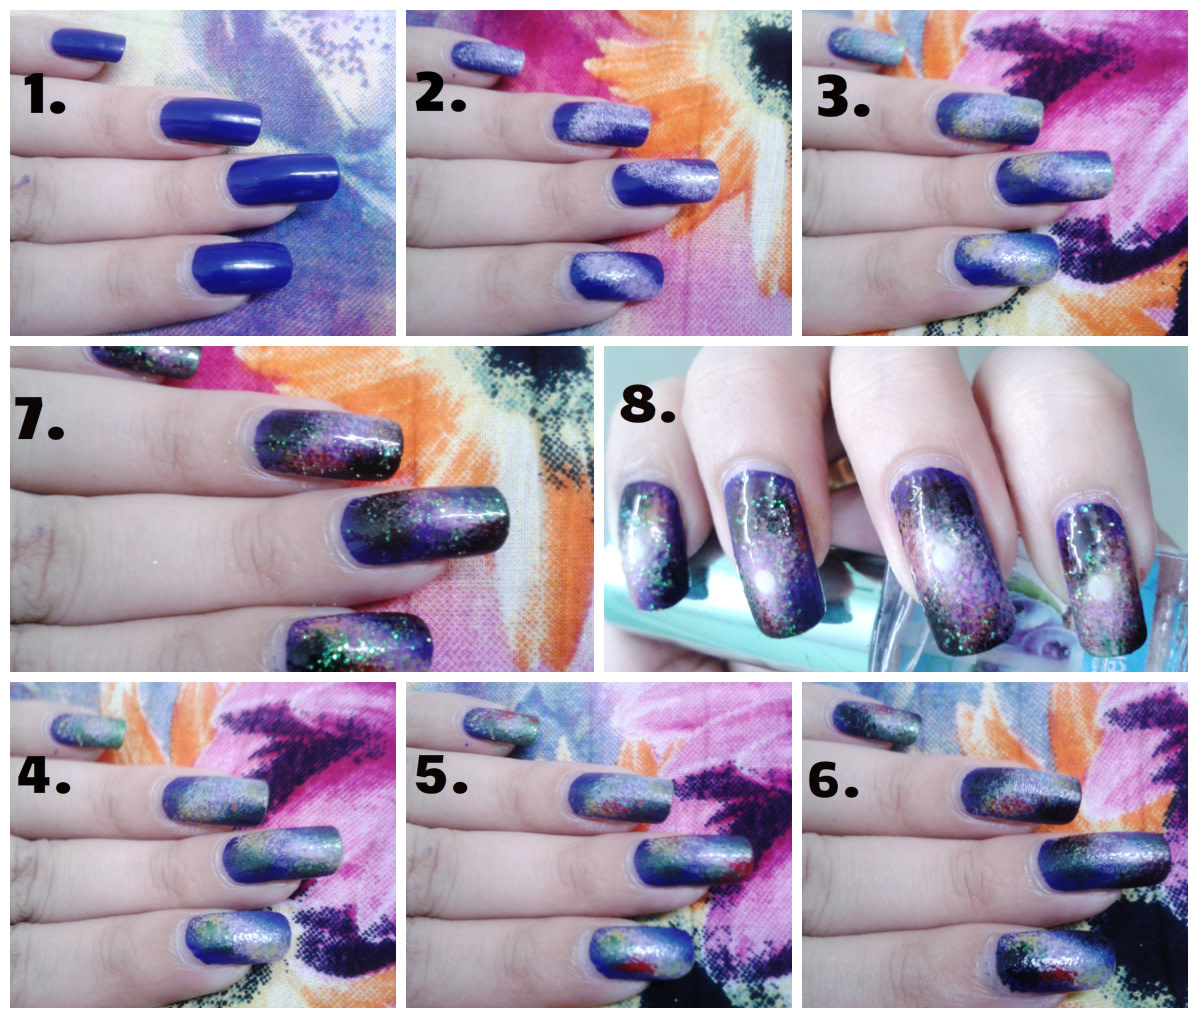 How to Do Ombre Nail Art at Home - Bellatory